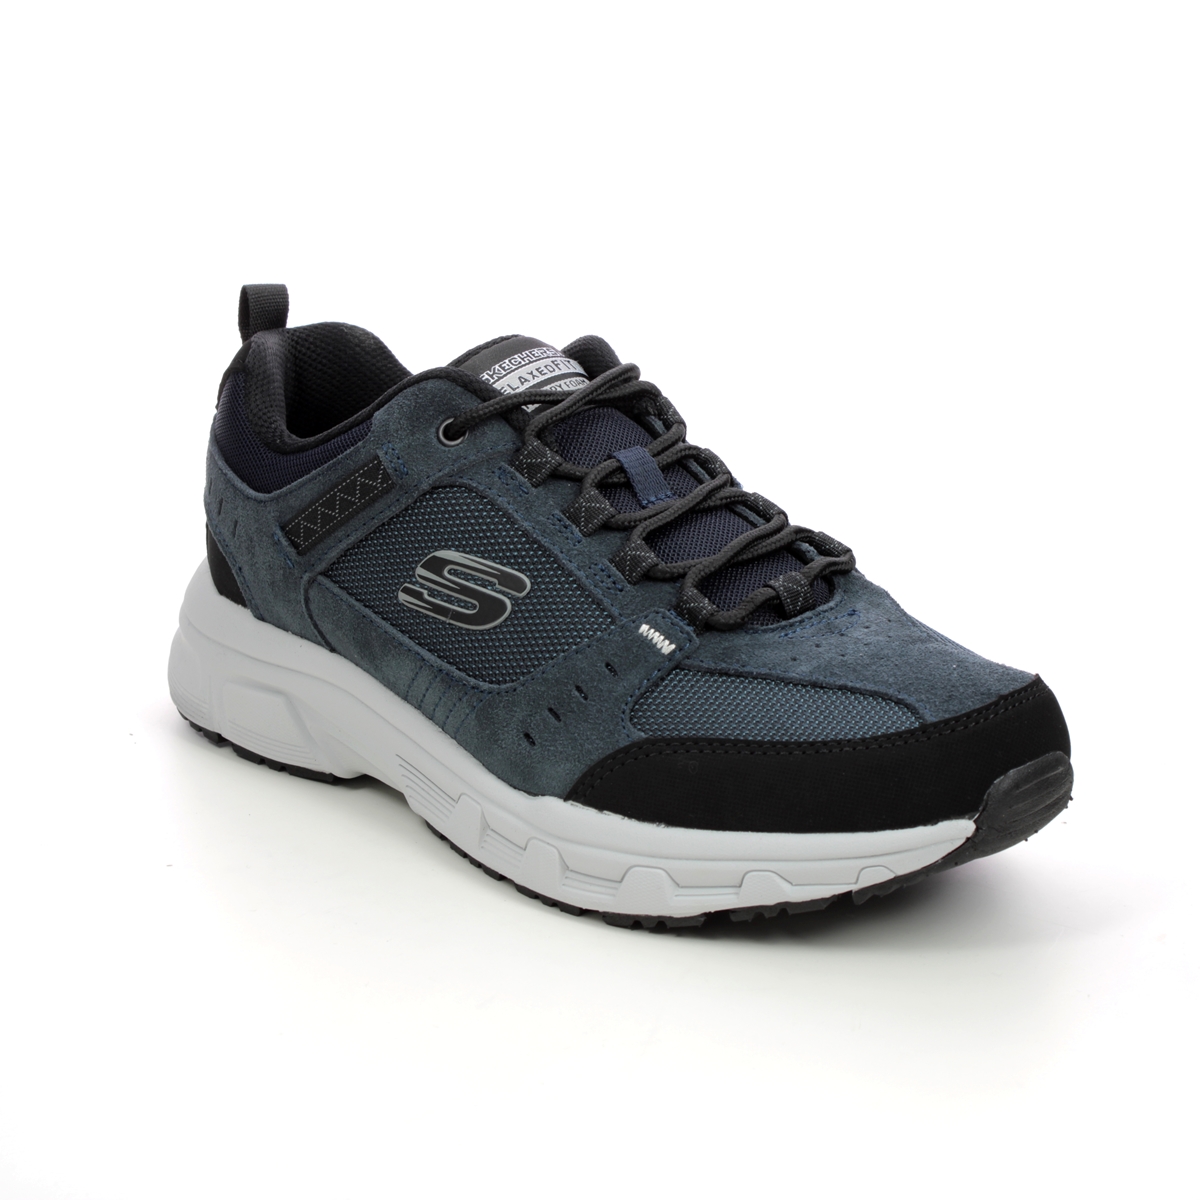 Skechers Oak Canyon Relaxed Fit Navy Black Mens Trainers 51893 In Size 8.5 In Plain Navy Black